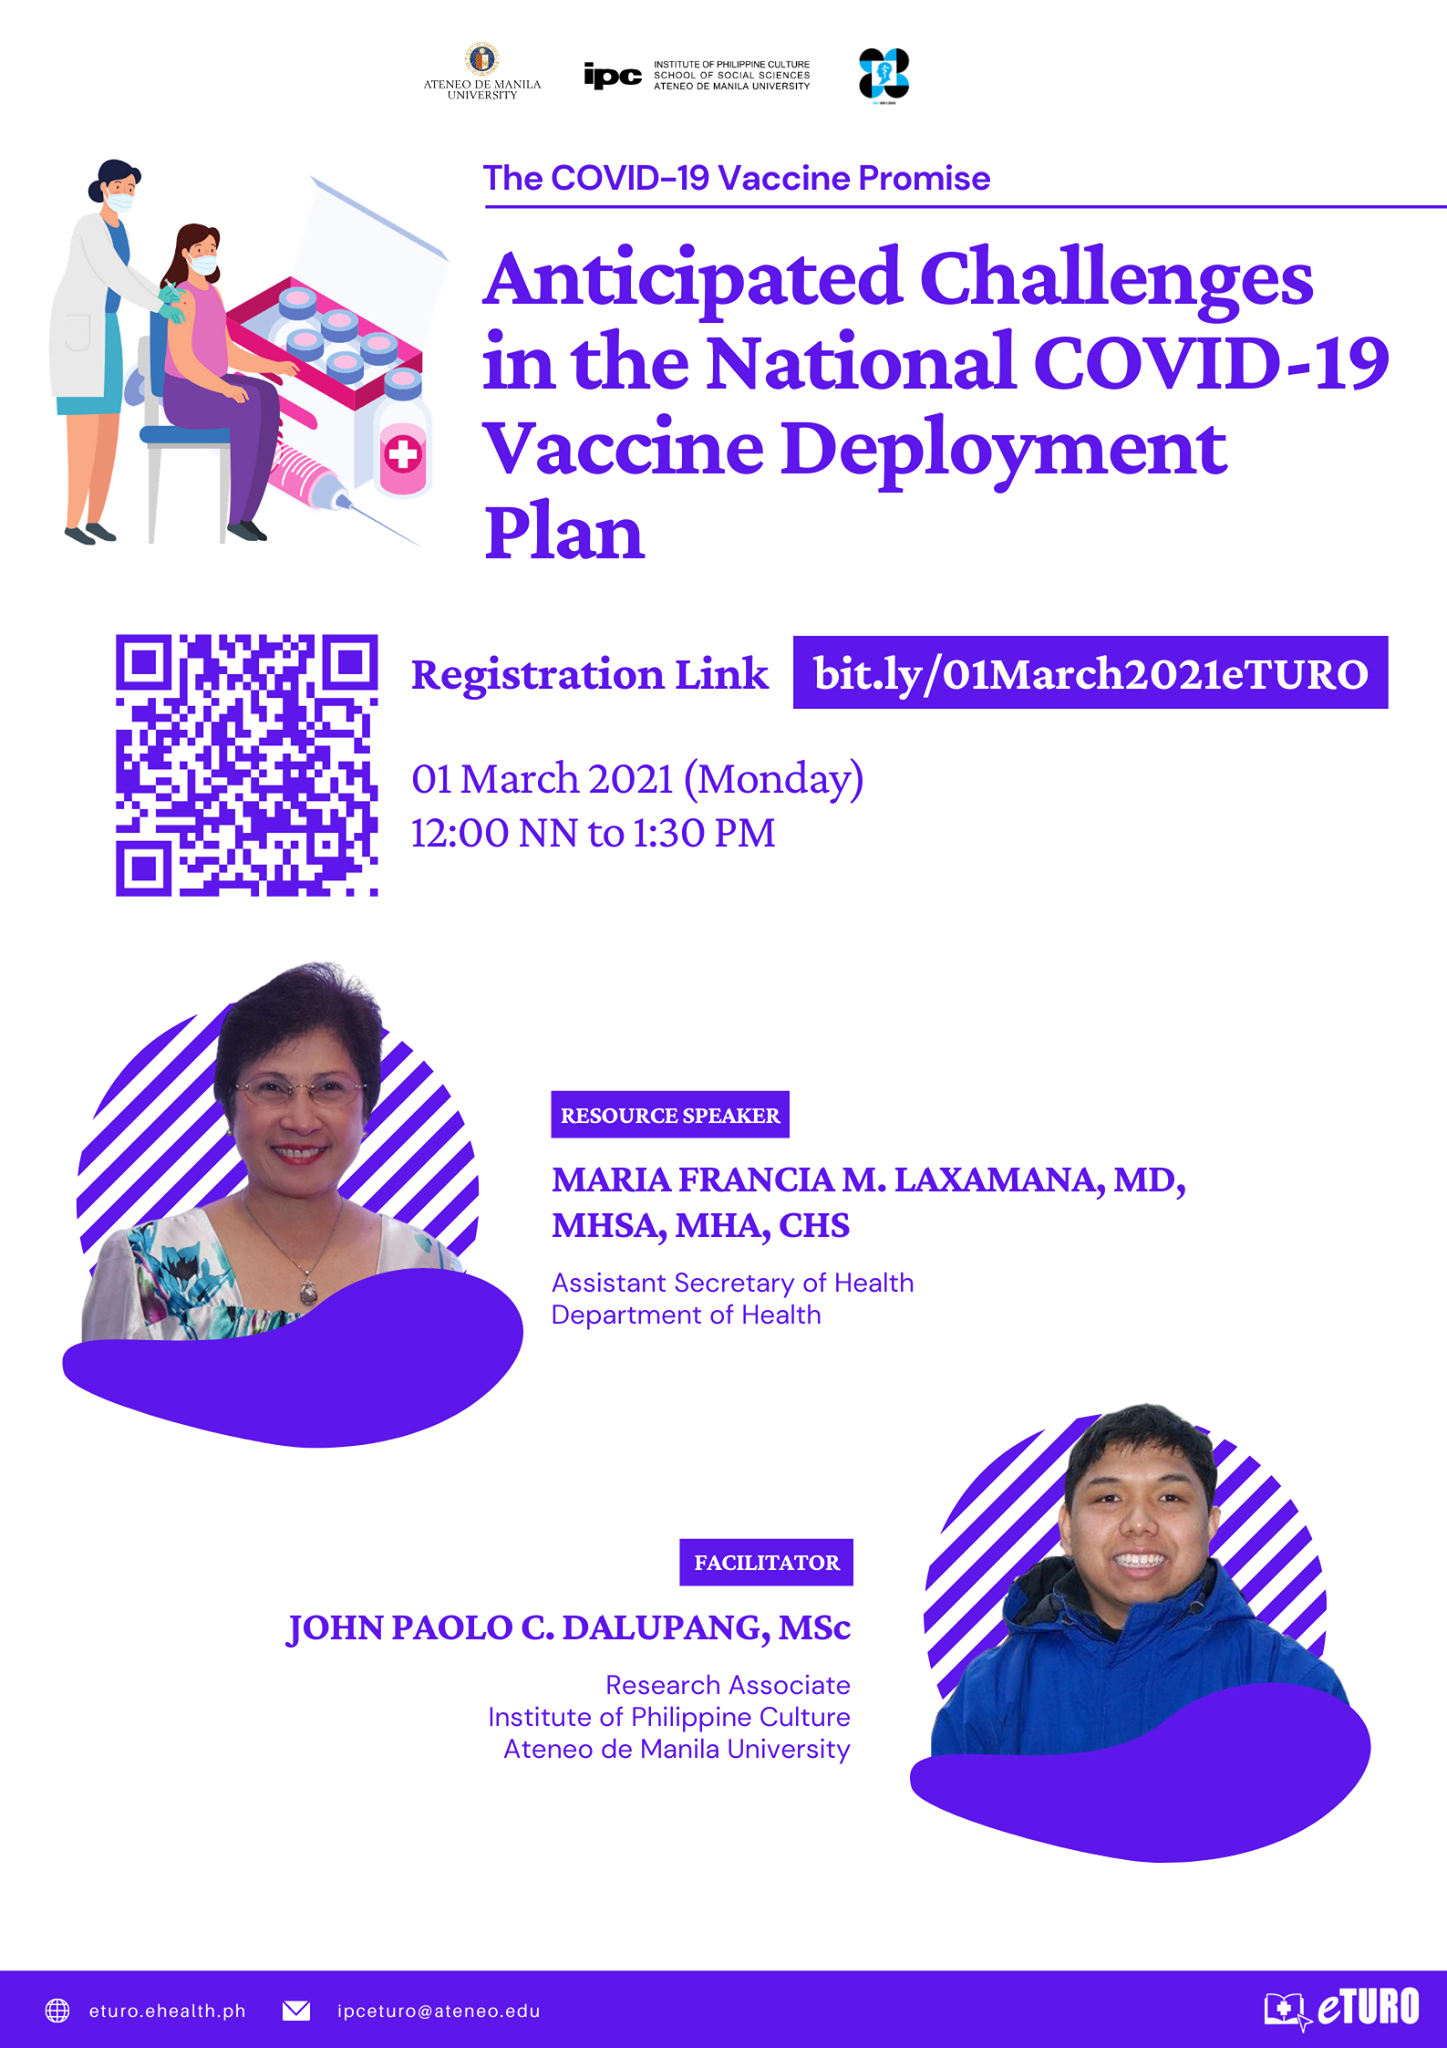 Anticipated Challenges in the National COVID-19 Vaccine Deployment Plan